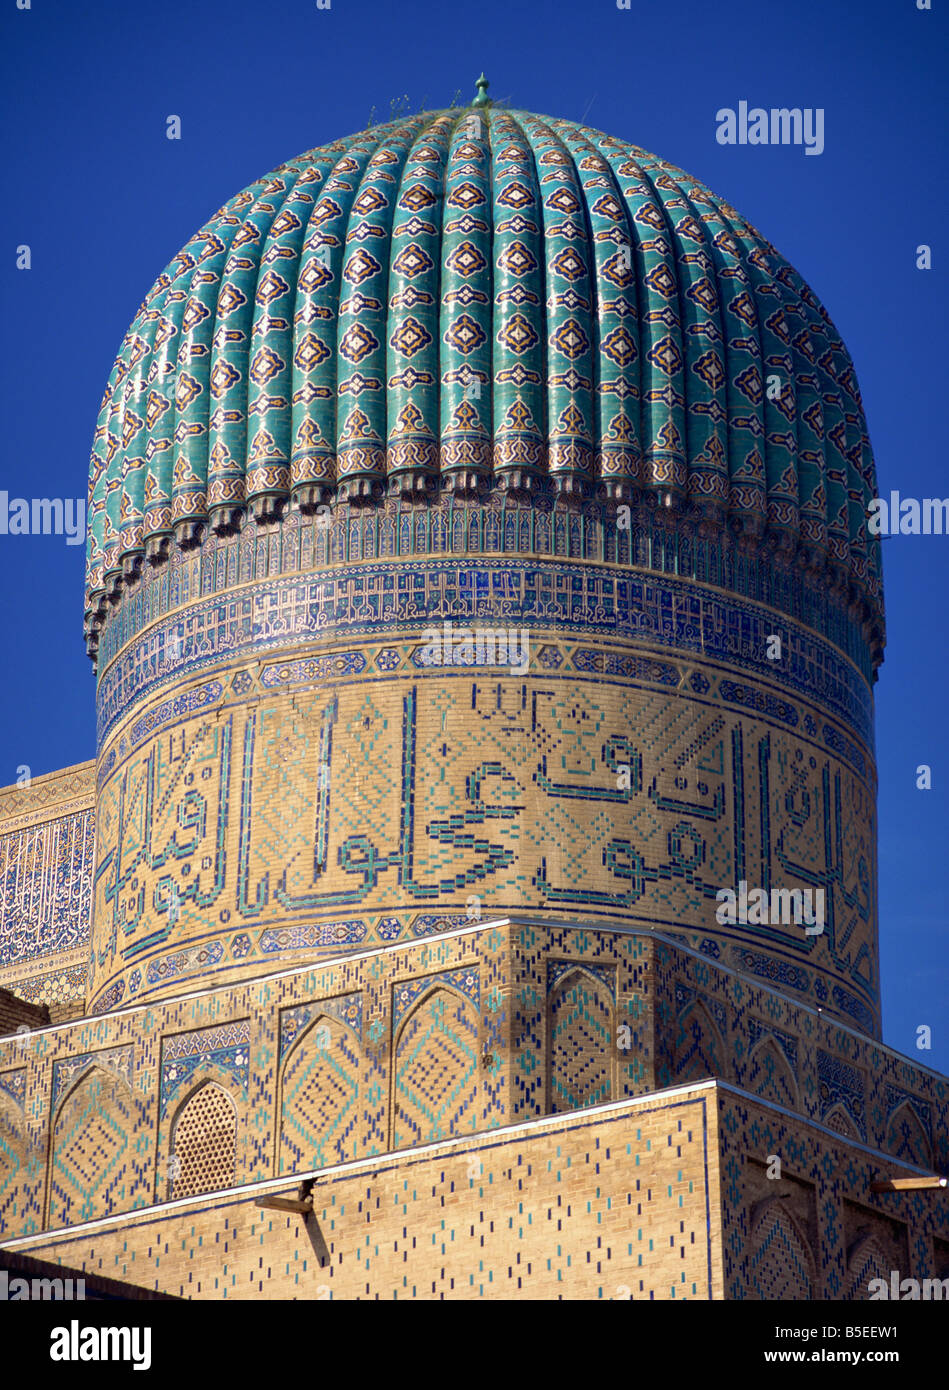 The ribbed dome, tiles and Arabic script on the Bibi Khanym Mosque in Samarkand, Uzbekistan, Central Asia Stock Photo